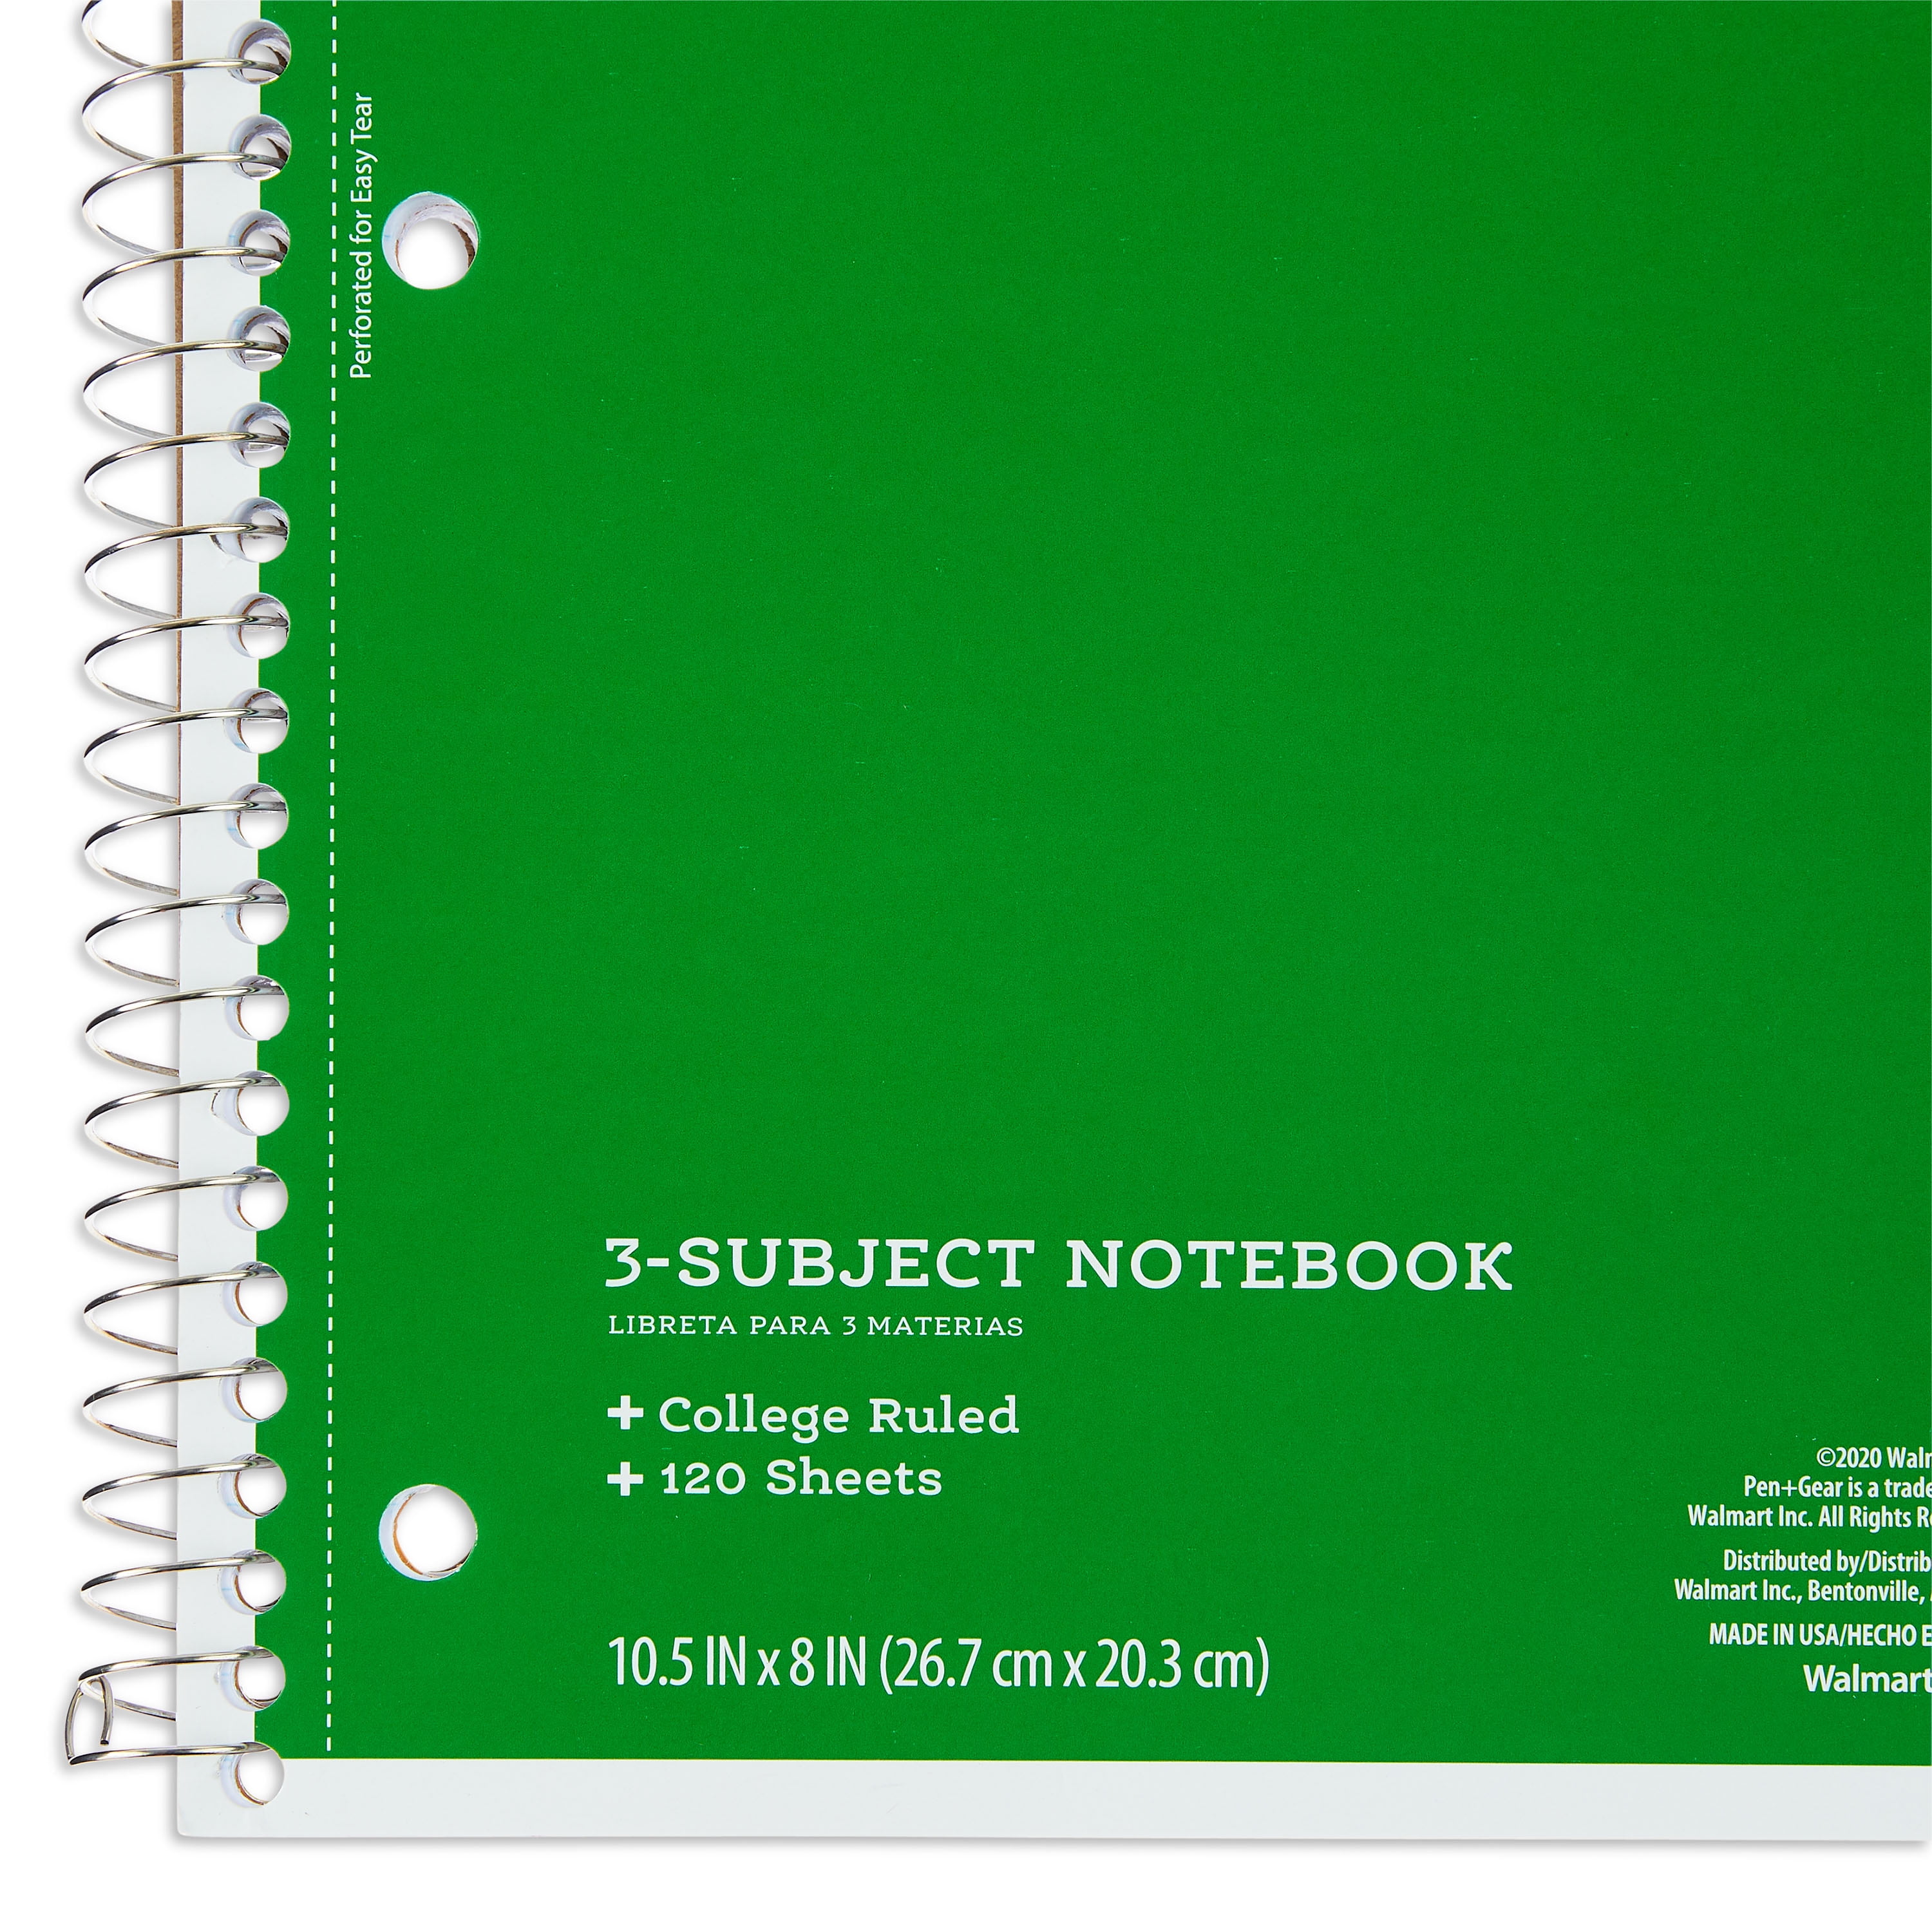 xckjhgiut693 turn pain into power 120 pages College Ruled Notebook Lined 